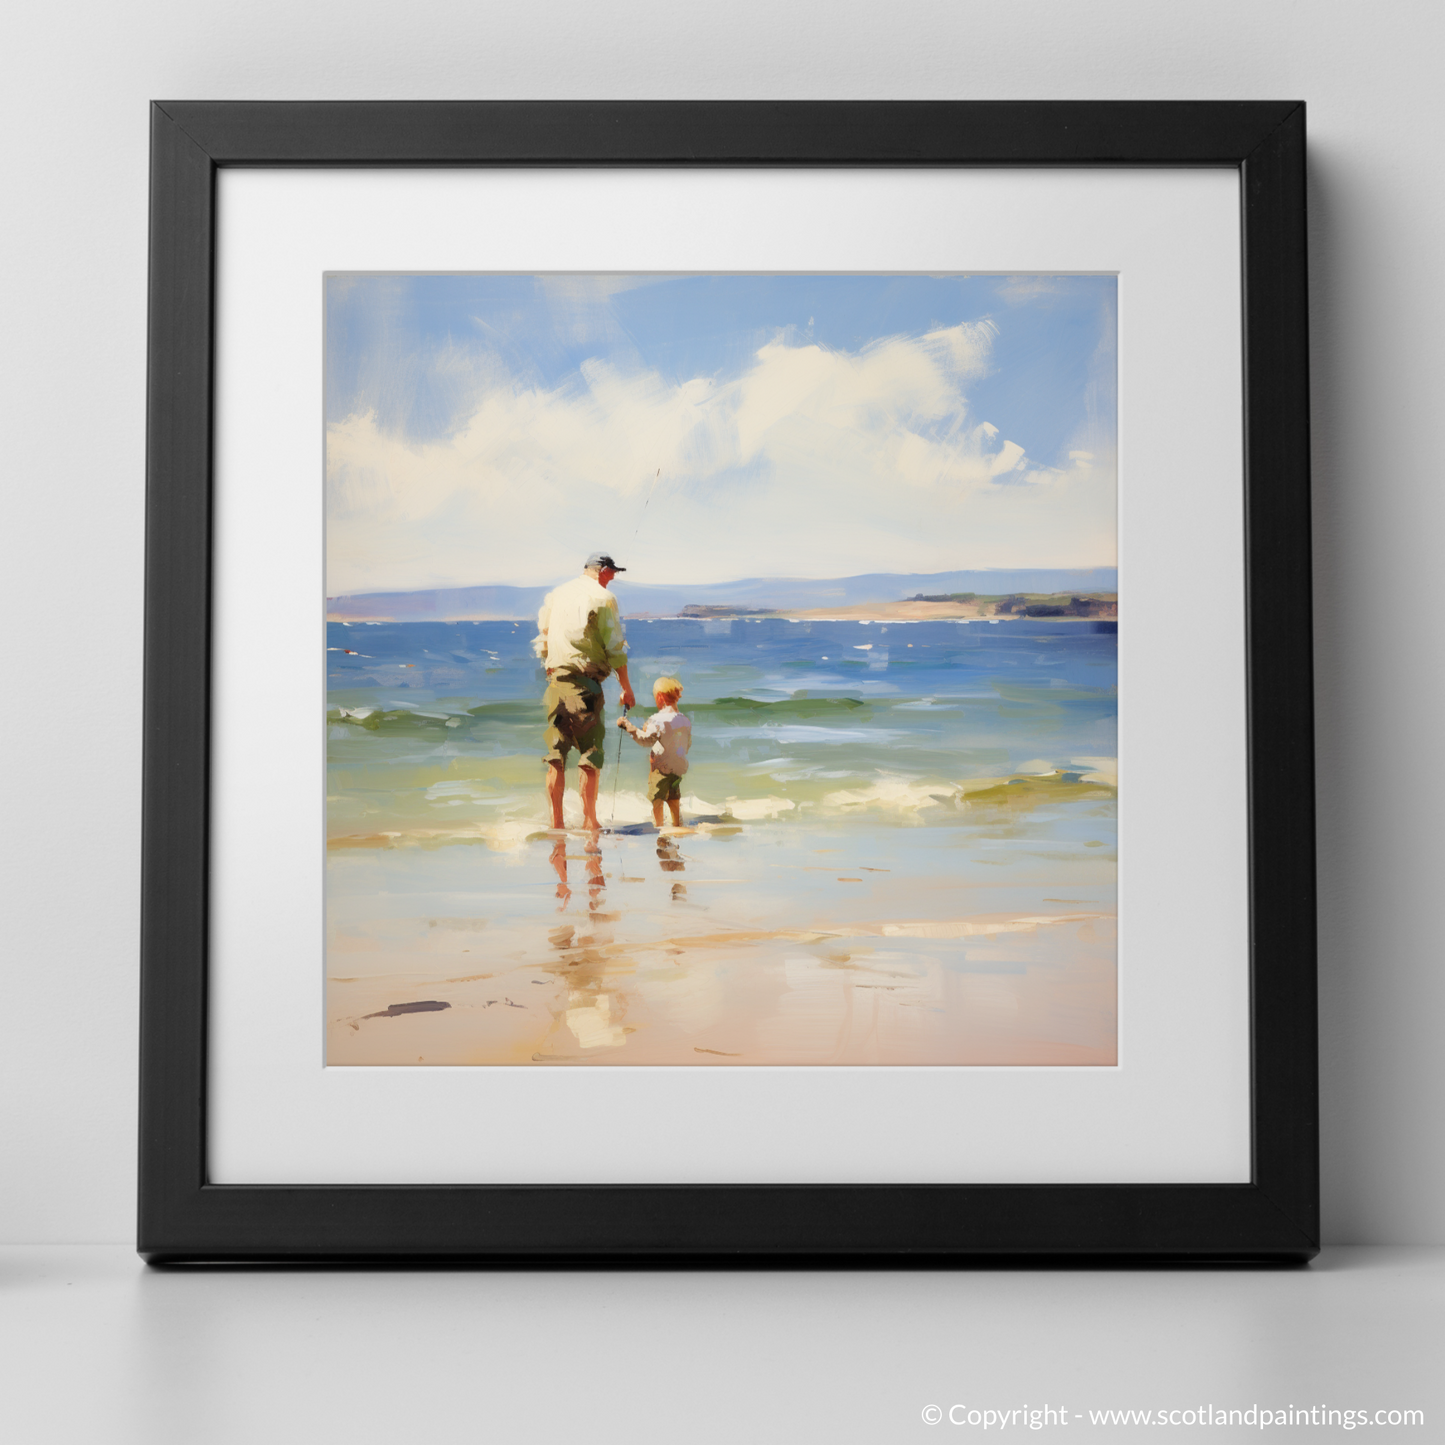 Art Print of A dad and son fishing at Rosemarkie Beach with a black frame